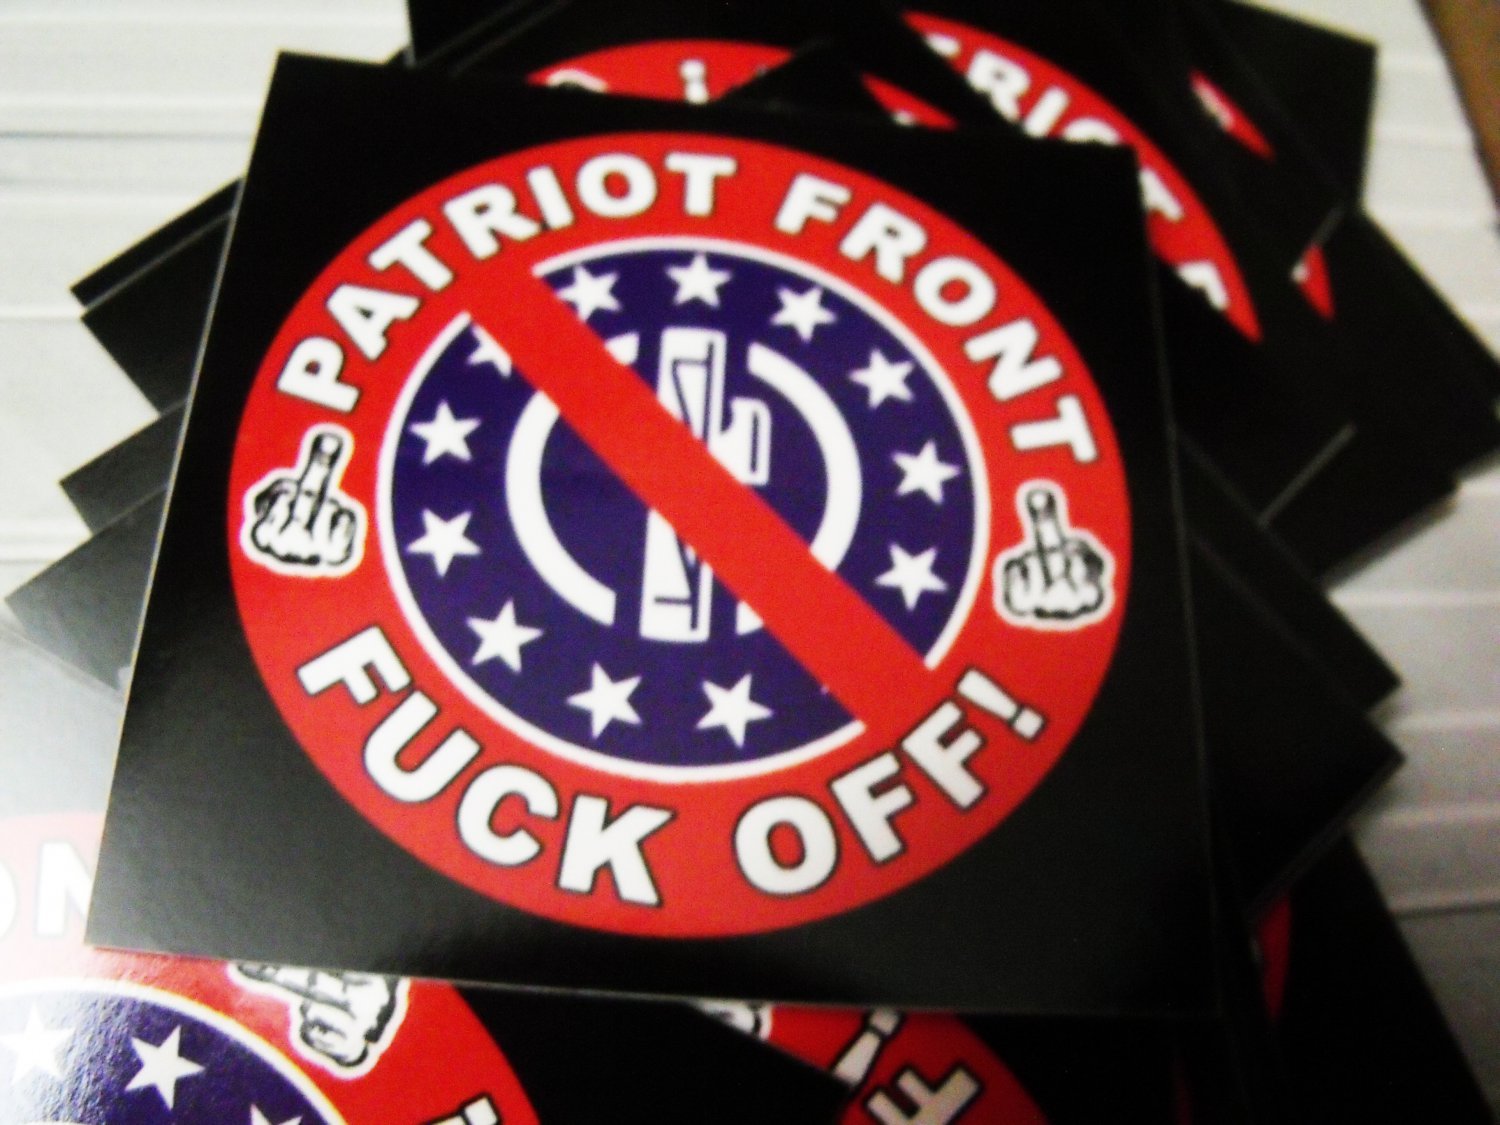 300 PATRIOT FRoNT FUCK OFF 2.5" x 2.5" stickers